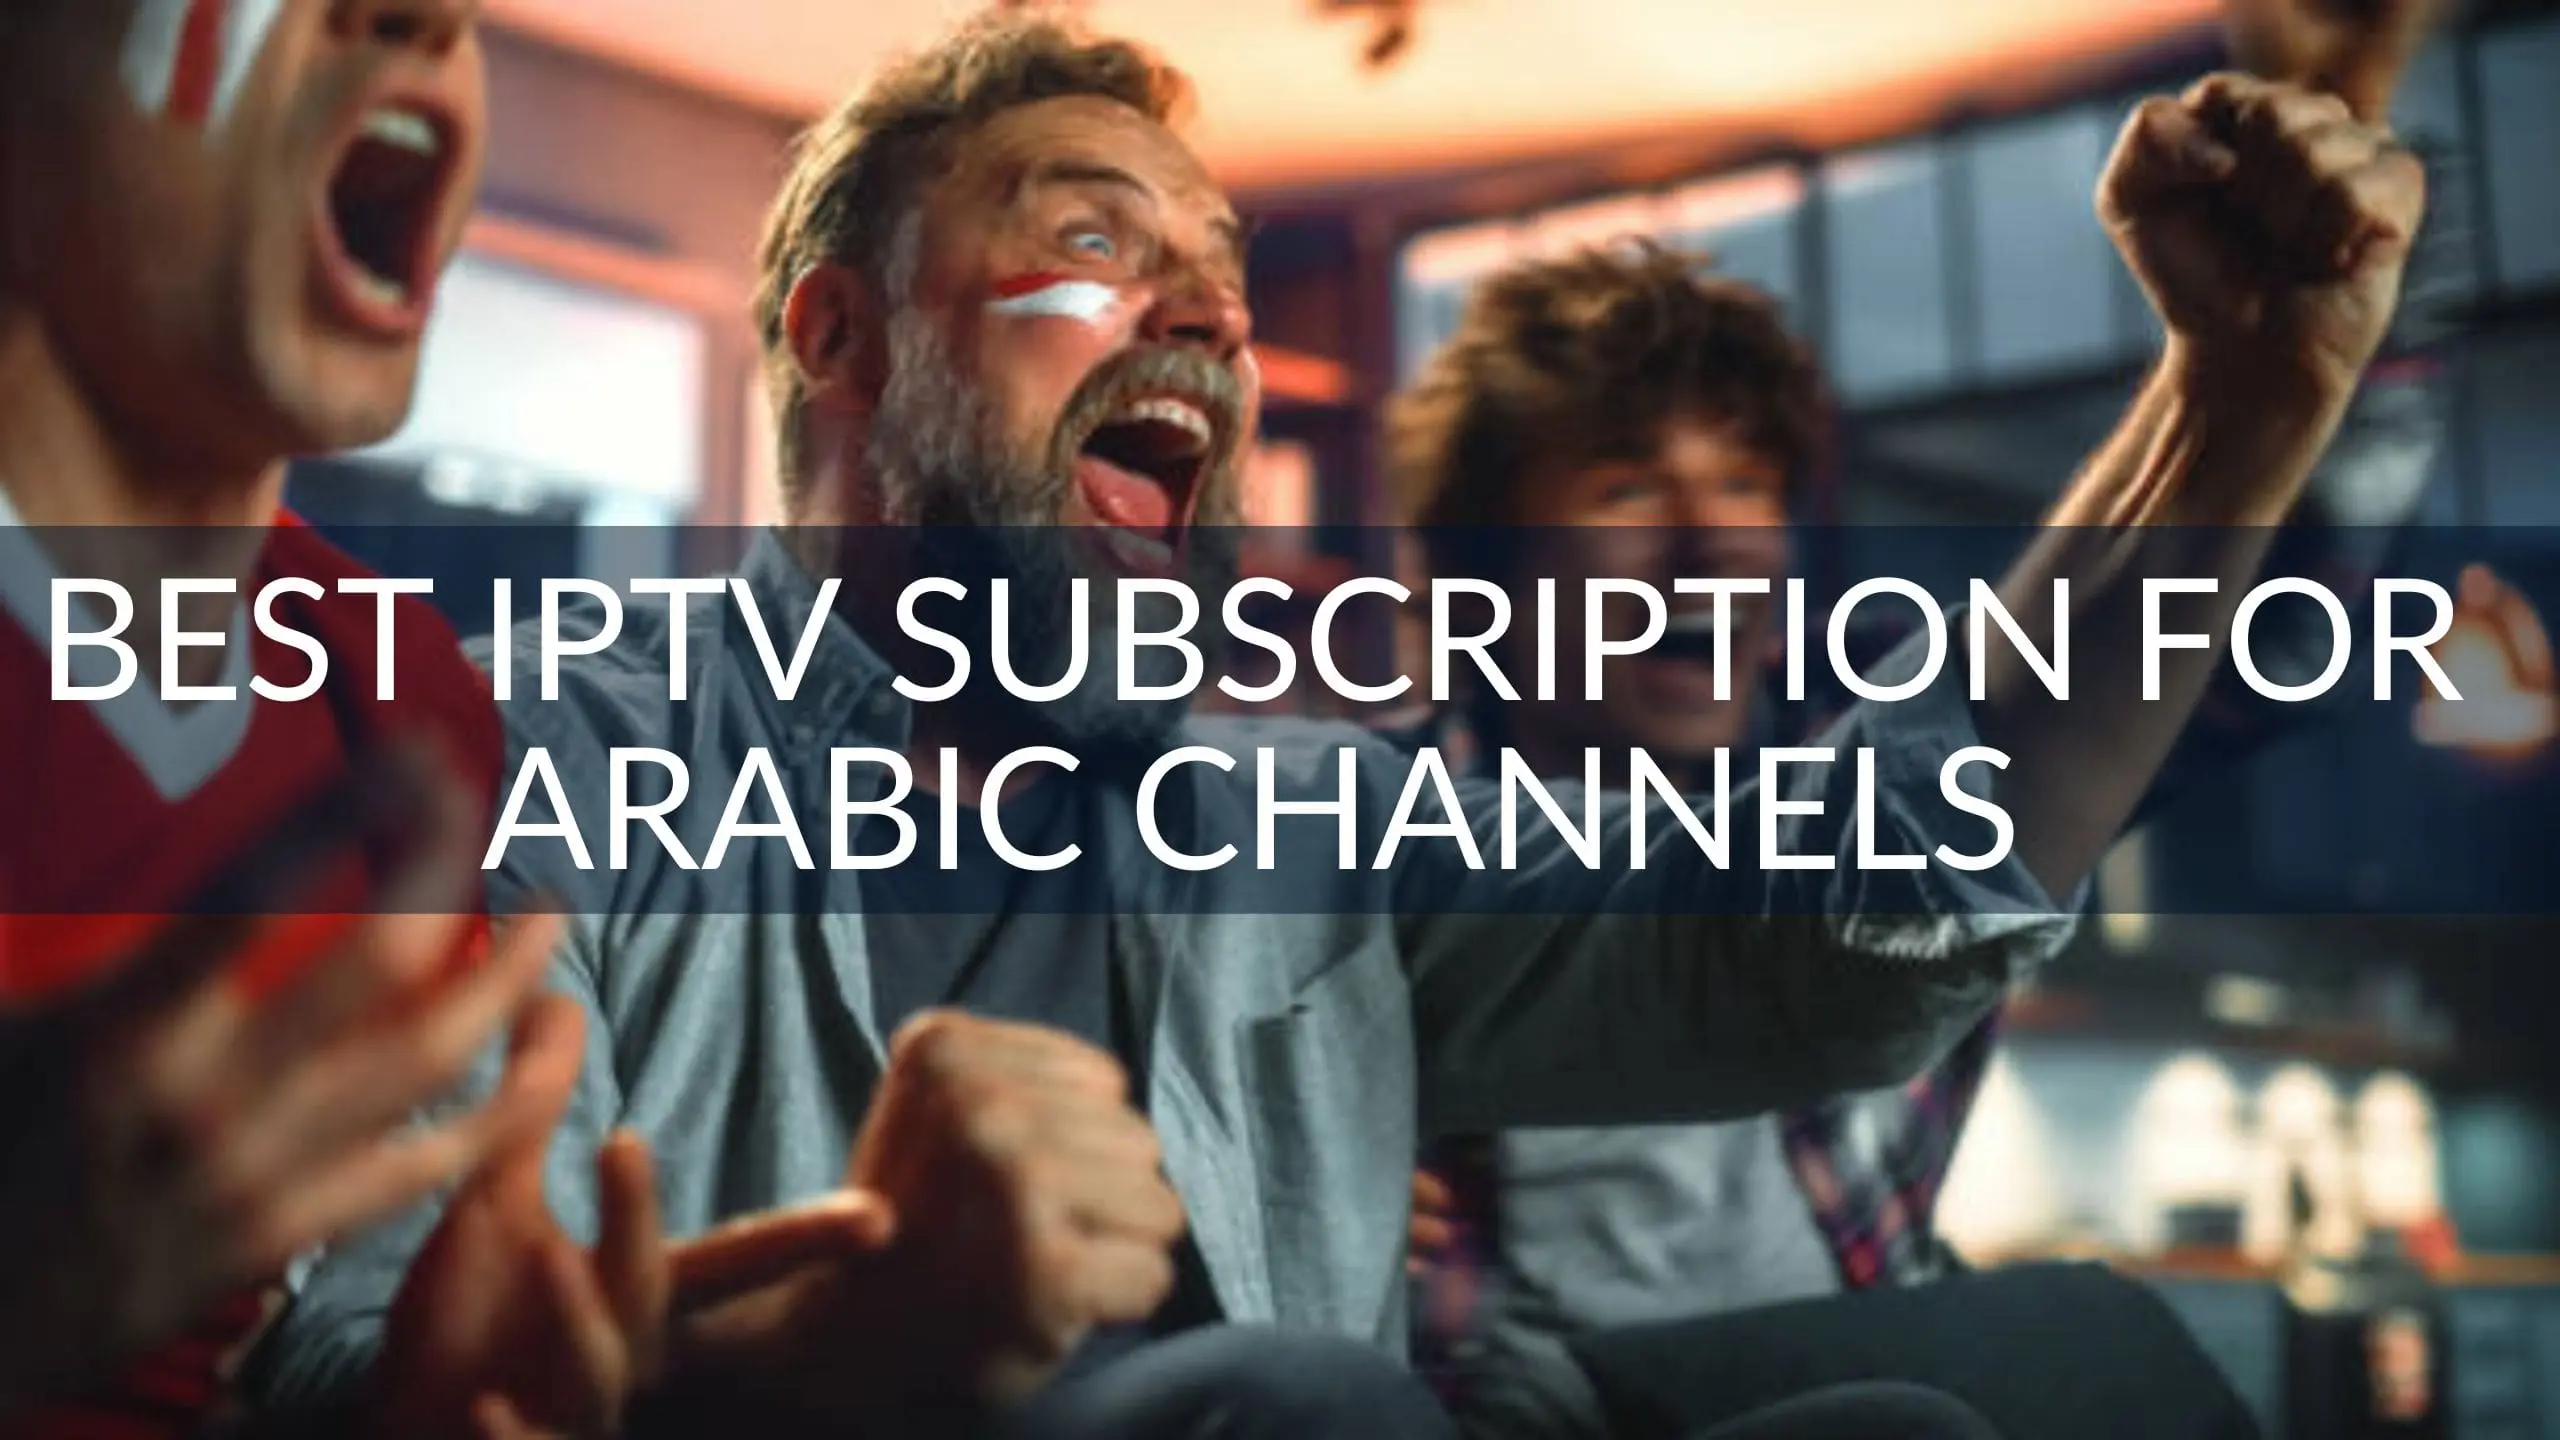 Best IPTV Subscription for Arabic Channels